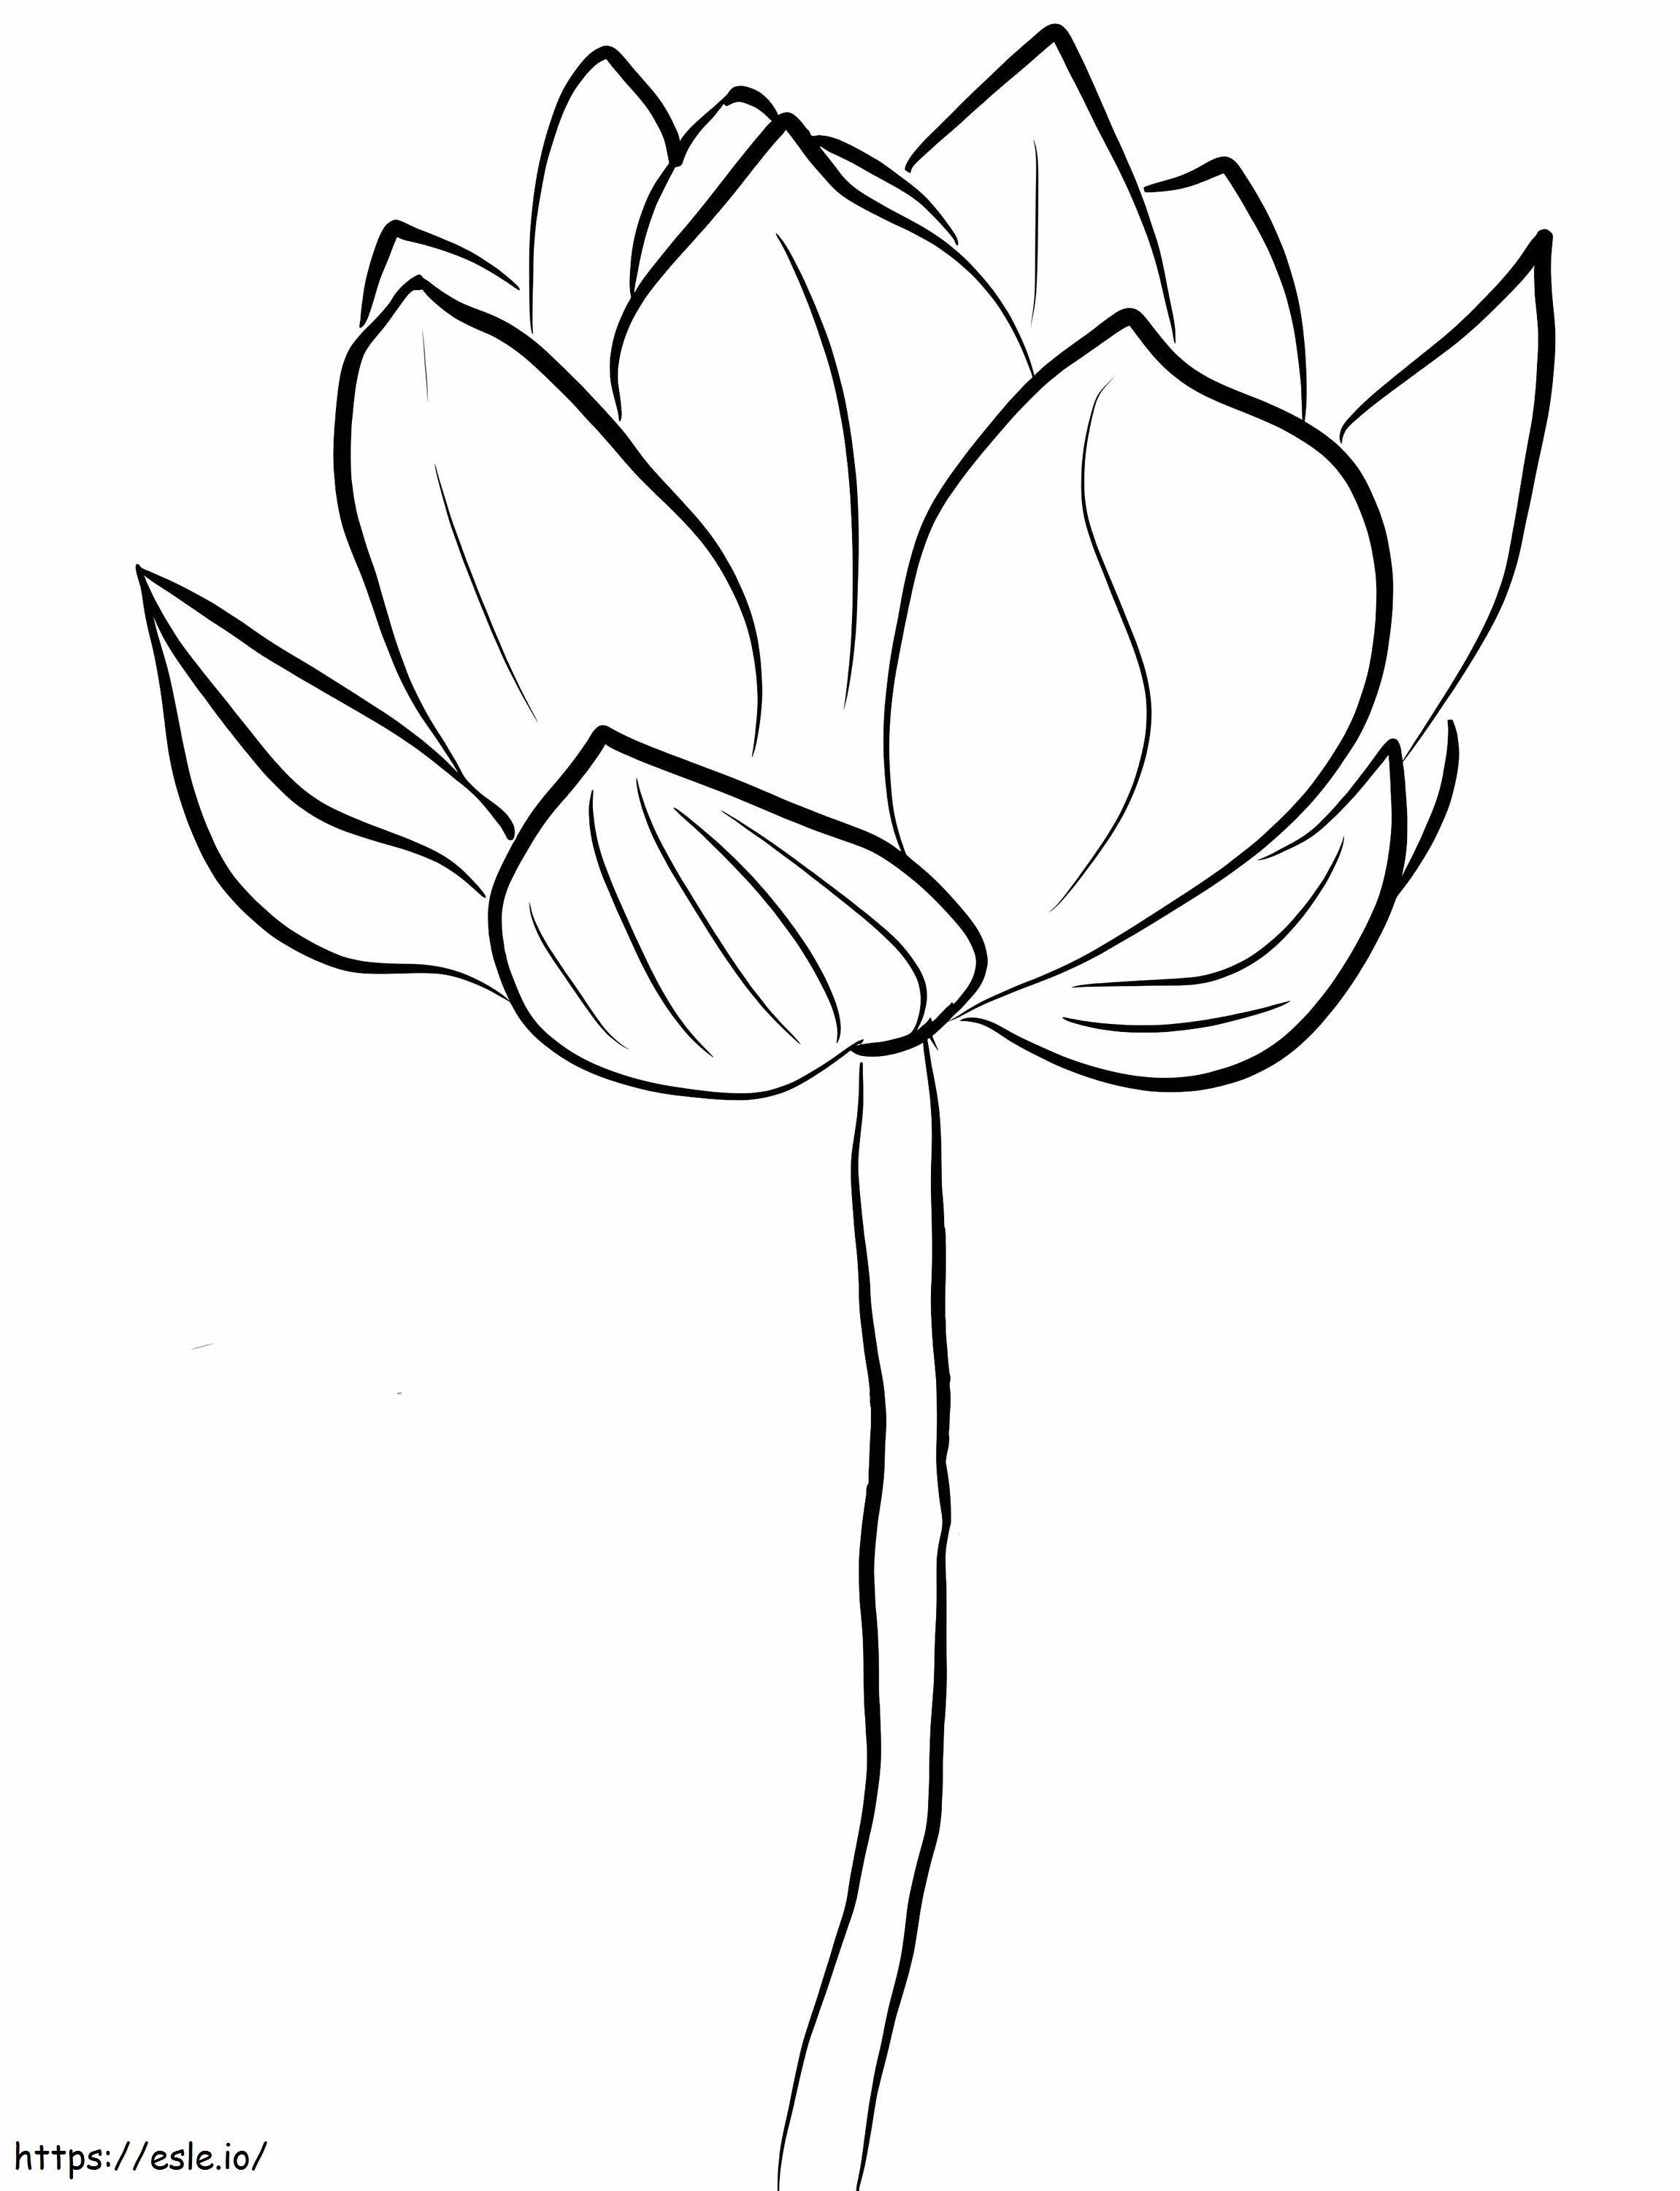 Lotus Blossom coloring page